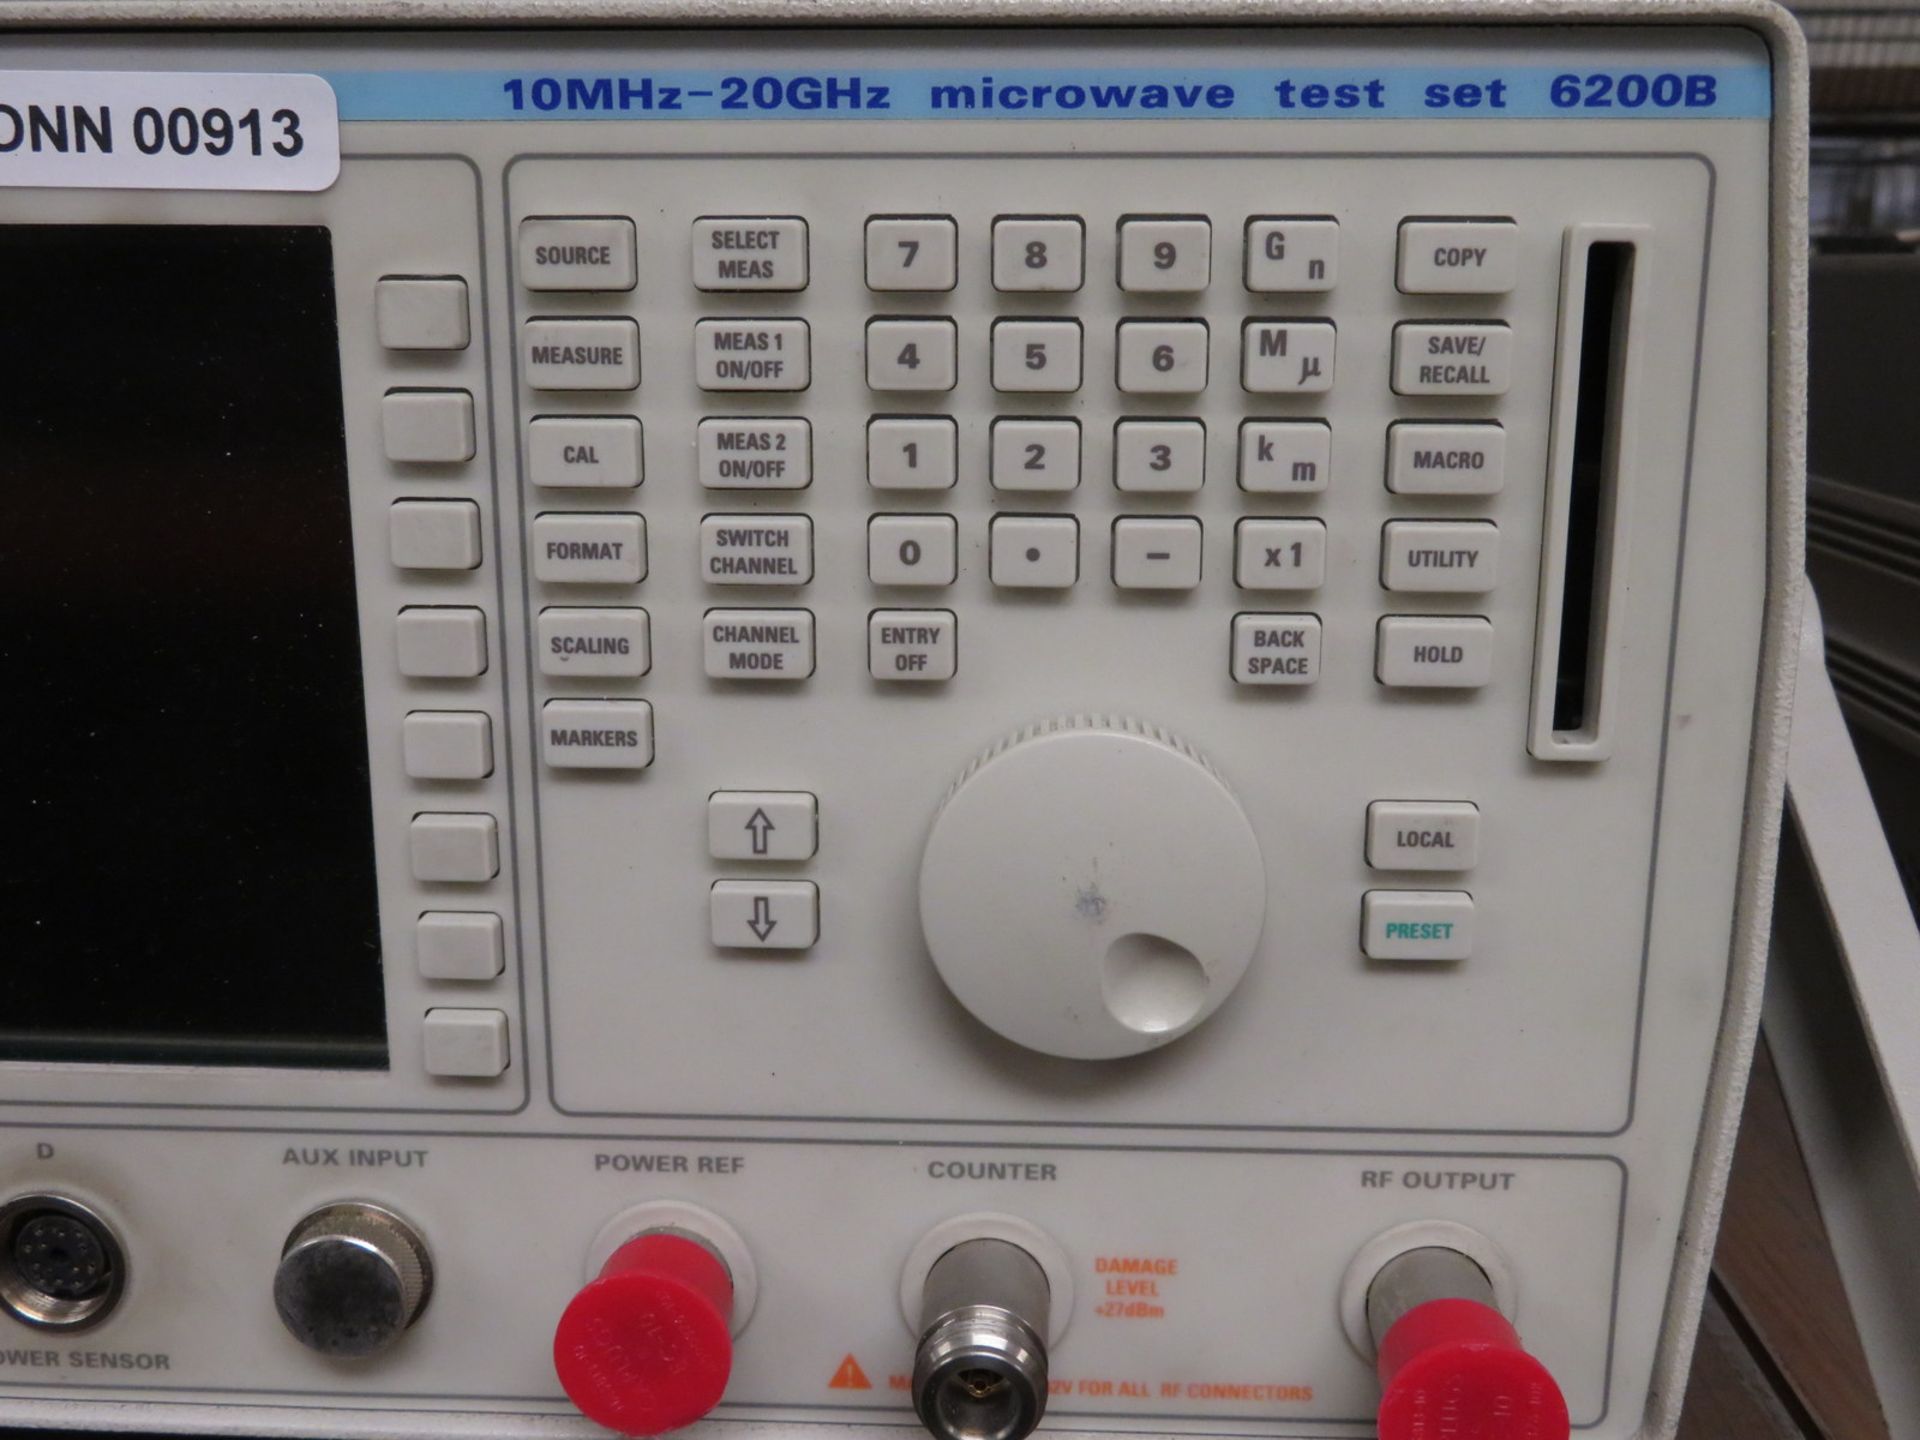 Marconi 6200B microwave test set 10MHz - 20GHz - Image 3 of 4